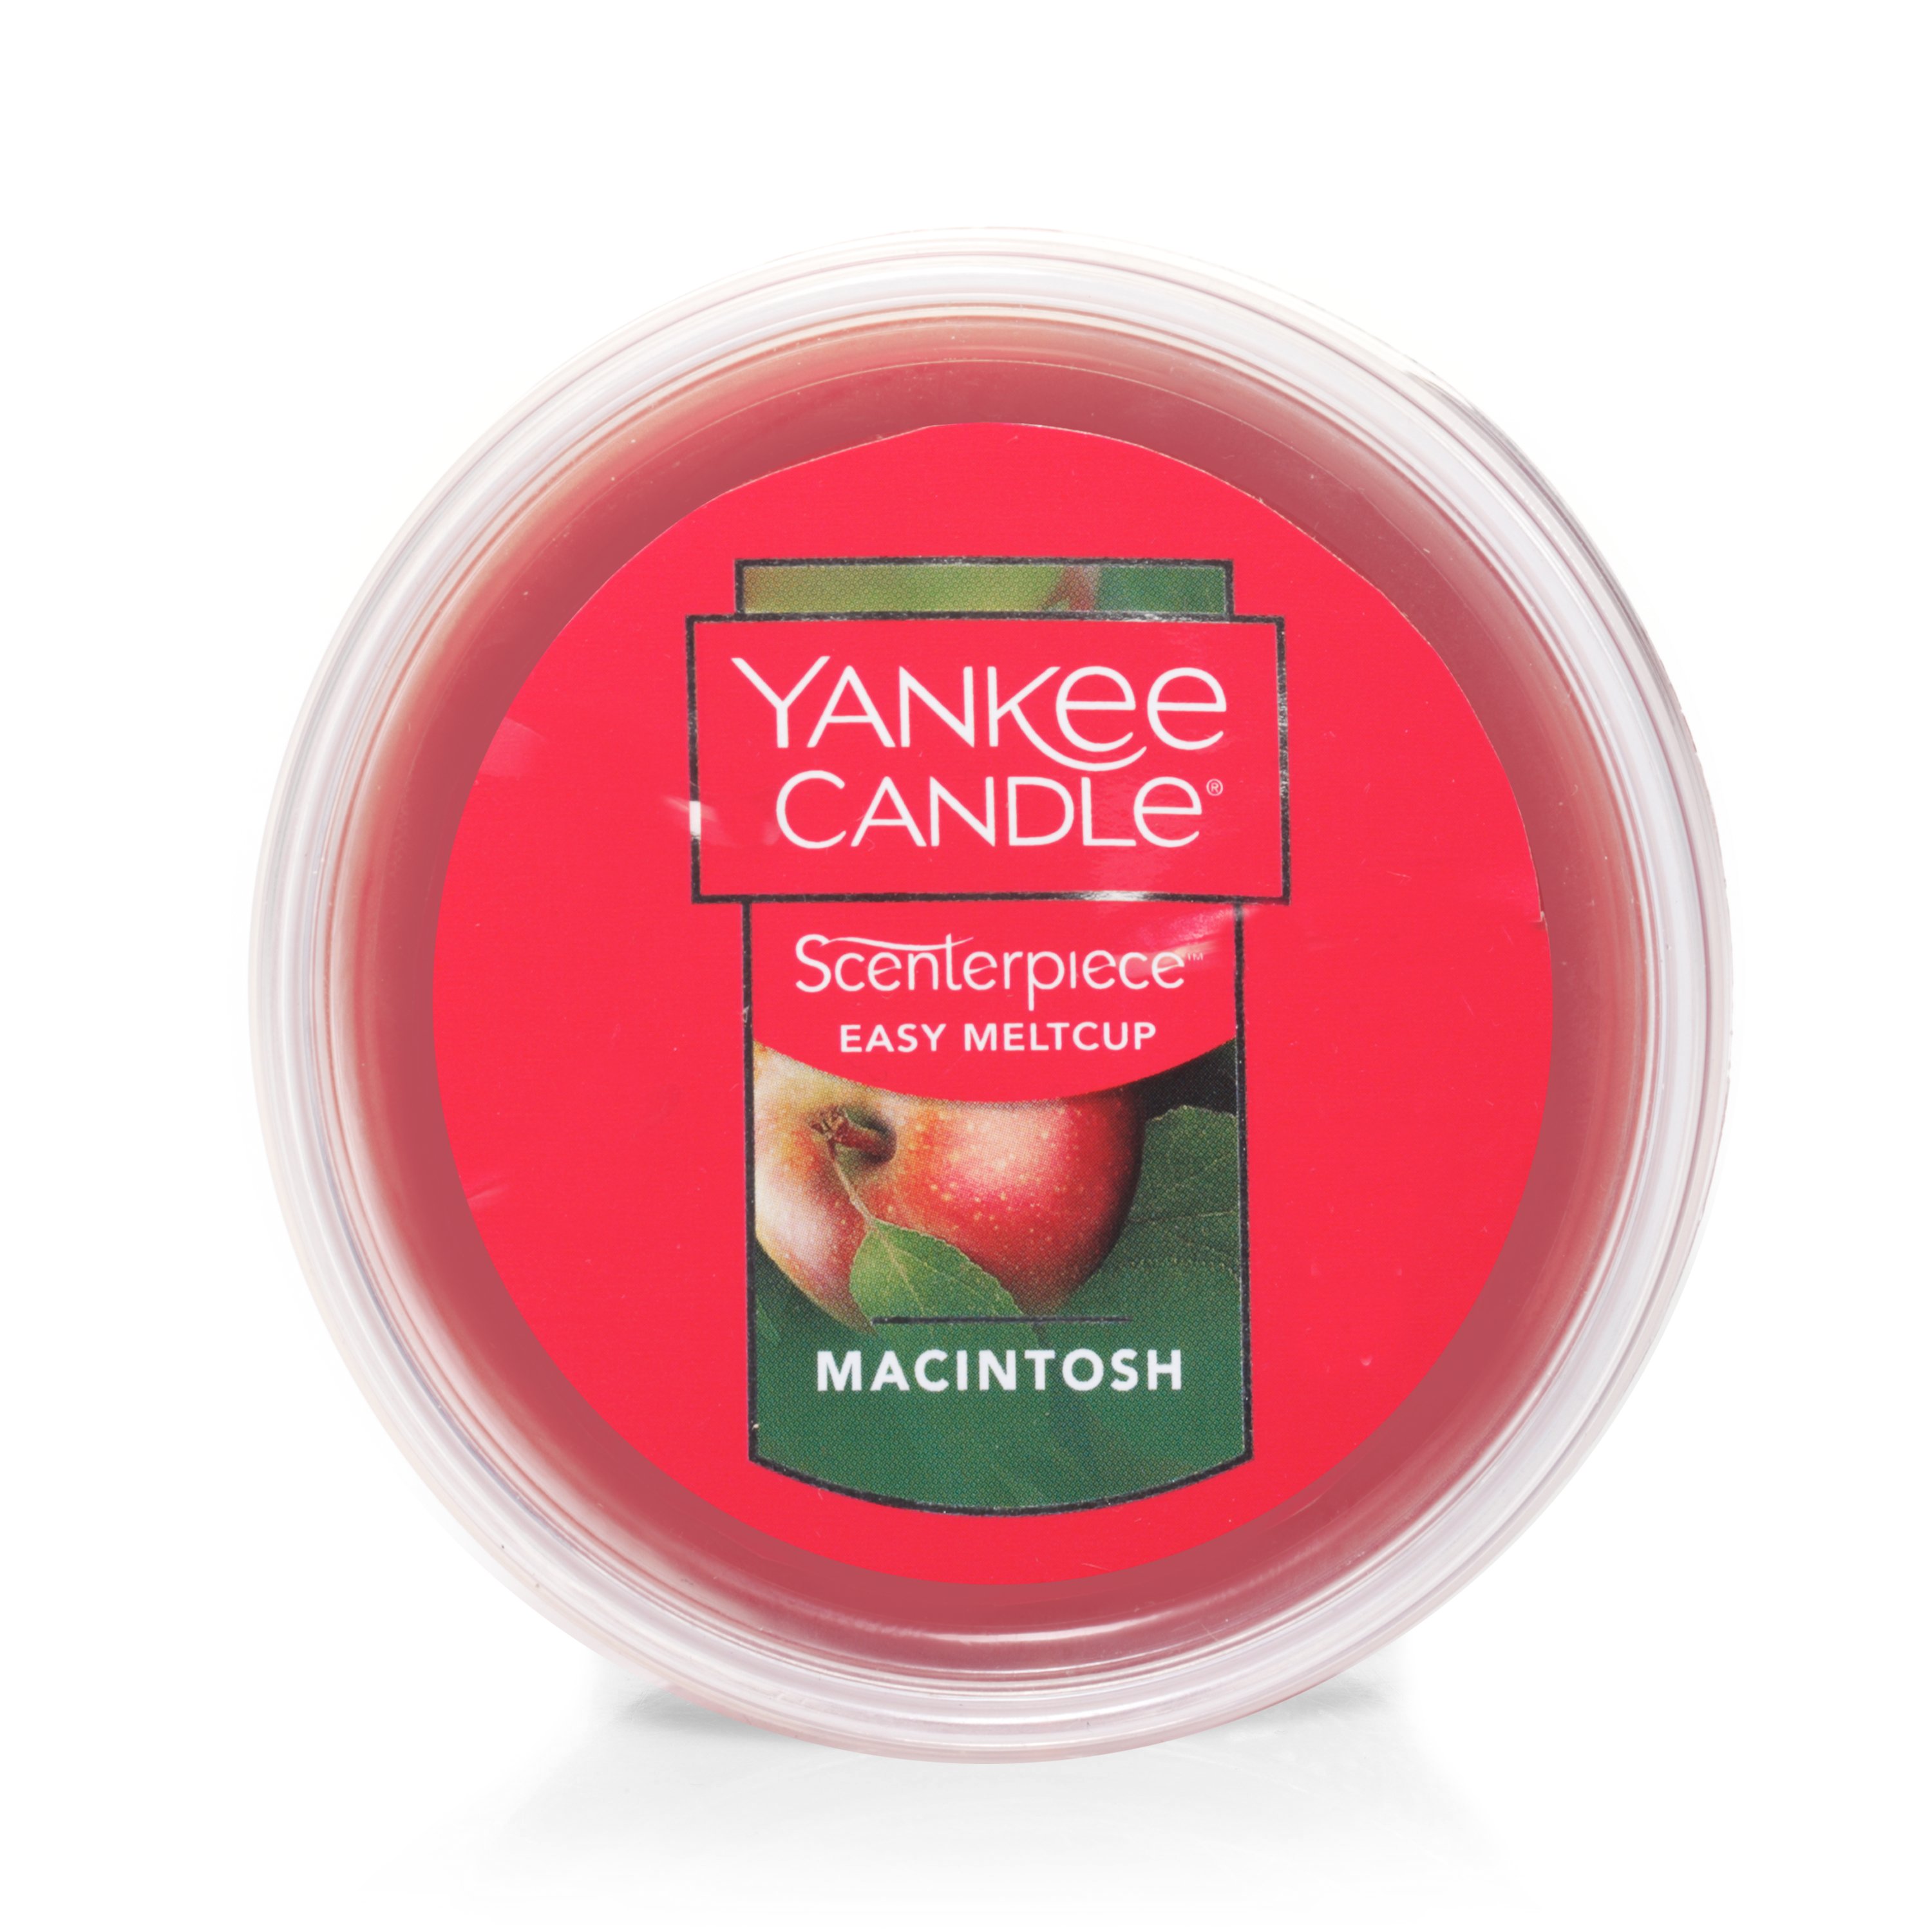 Yankee Candle Scenterpiece Easy Meltcups ***NEW SCENTS*** To Choose From 